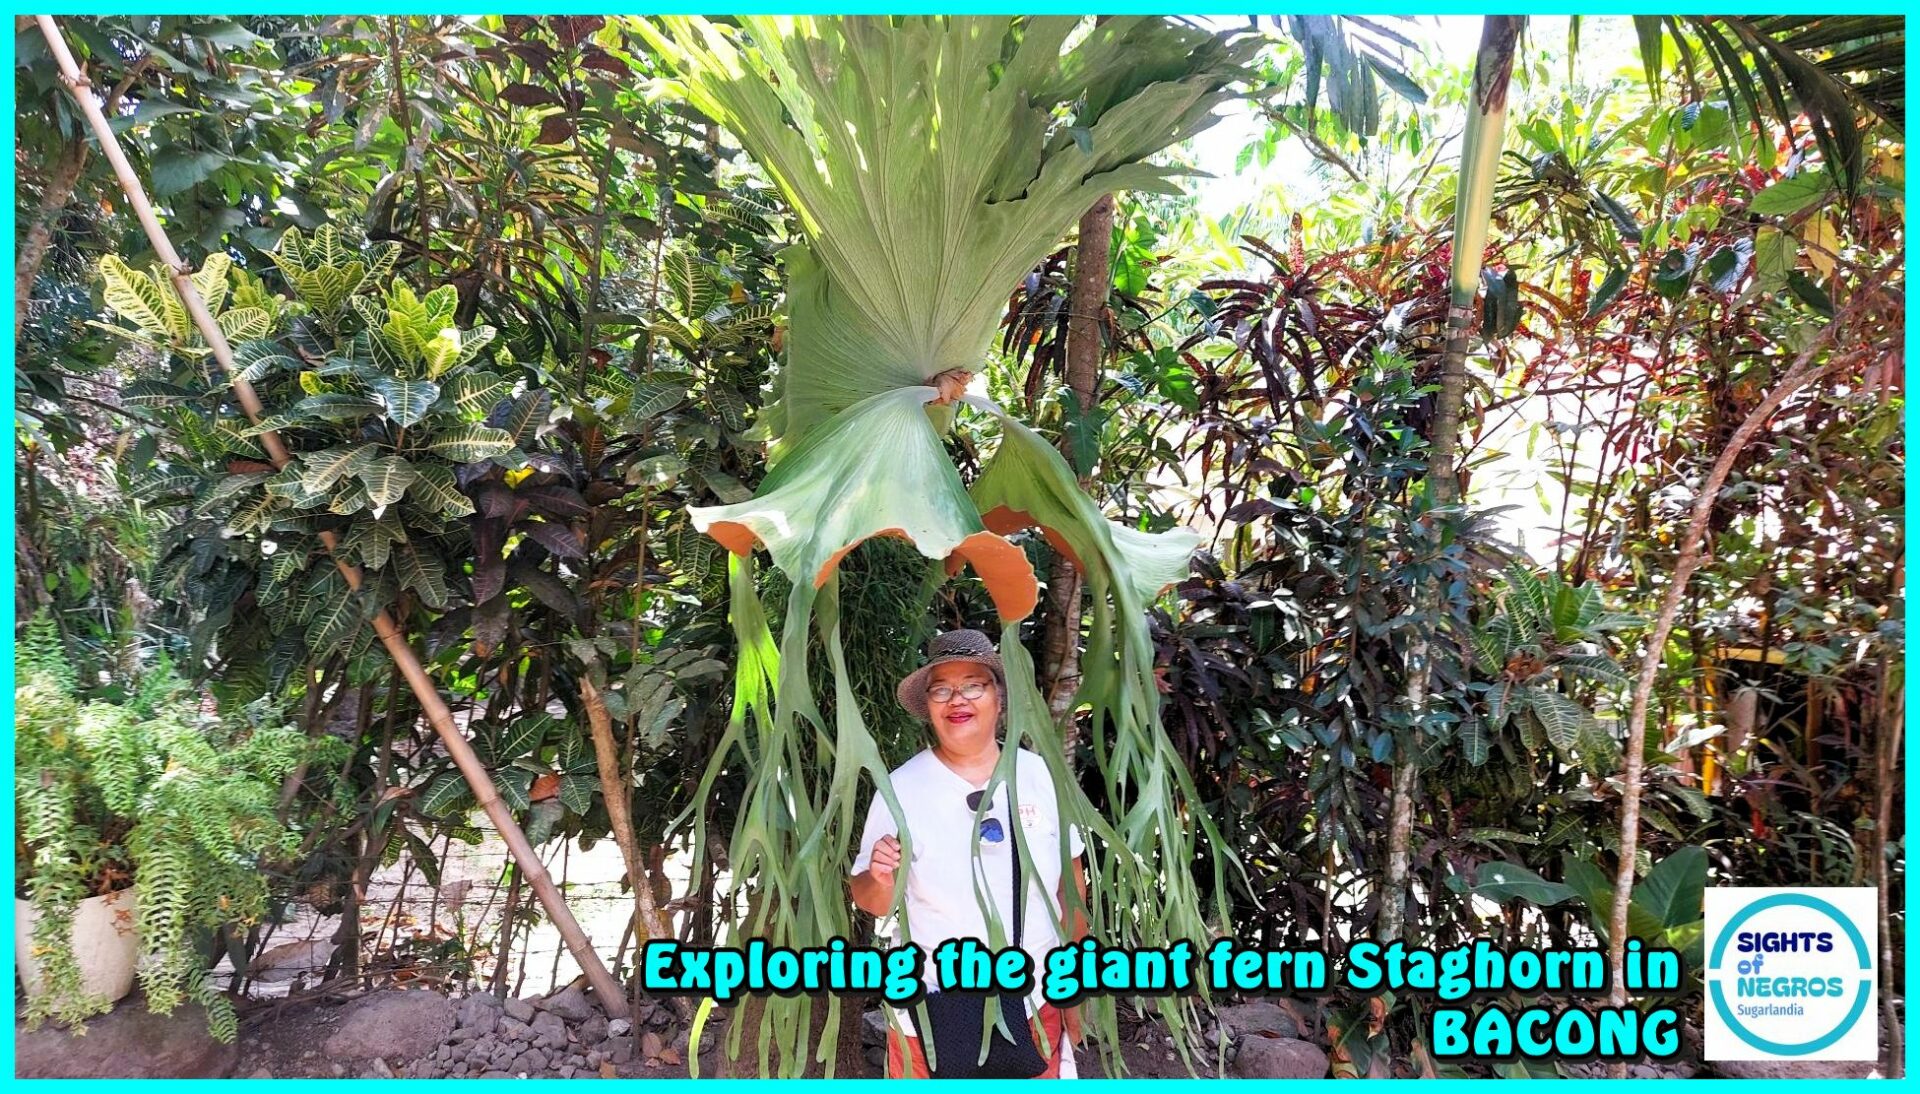 SIGHTS OF NEGROS - PHOTO OF THE DAY - Exploring the Giant Staghorn Fern in Bacong, Negros Orienta